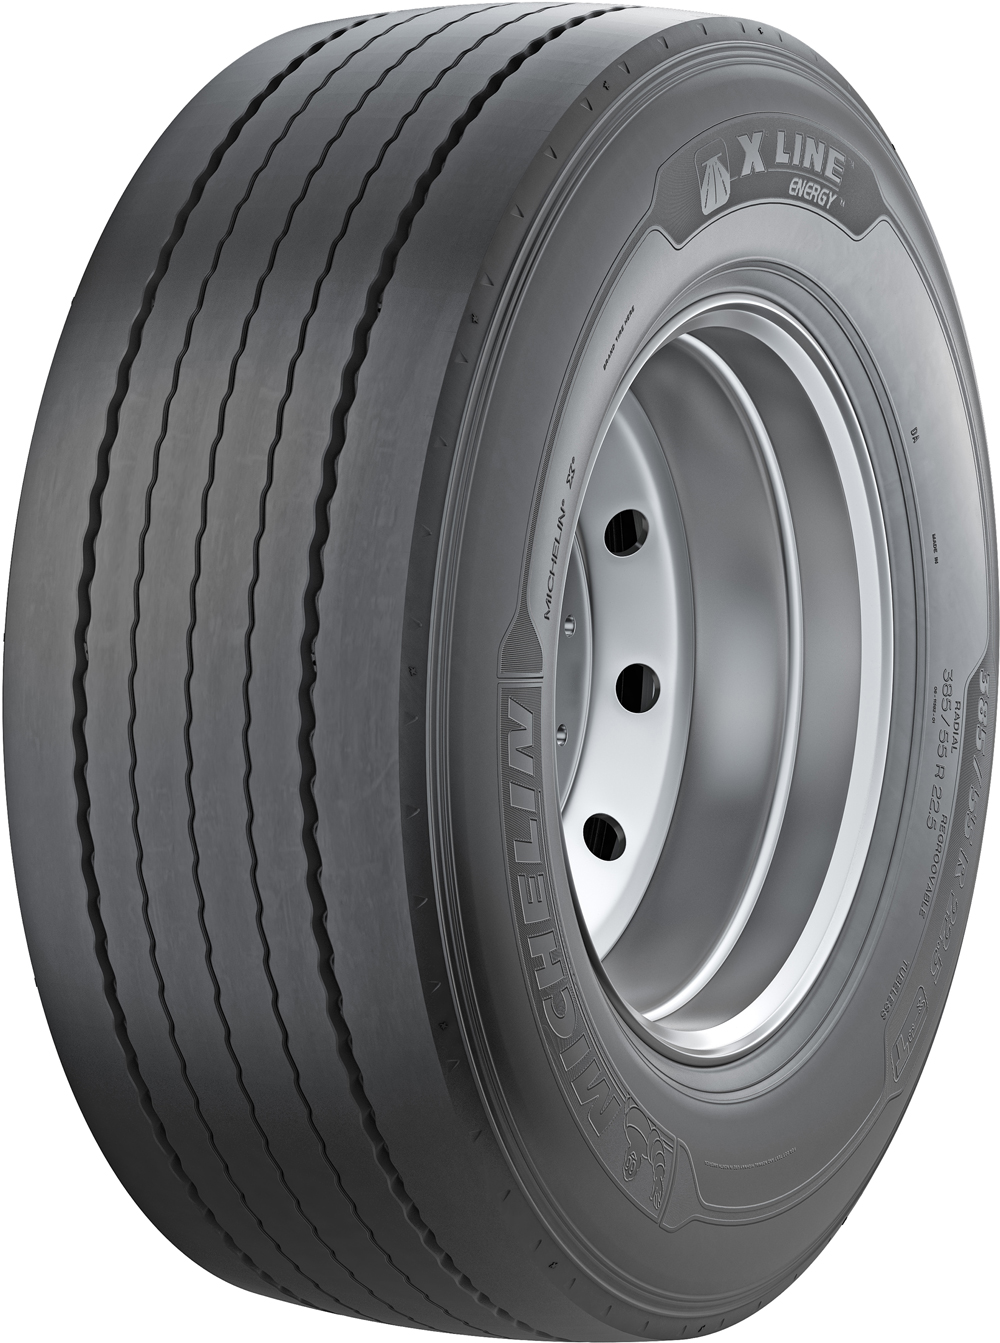 Anvelope camion MICHELIN XLINET 215/75 R17.5 135J